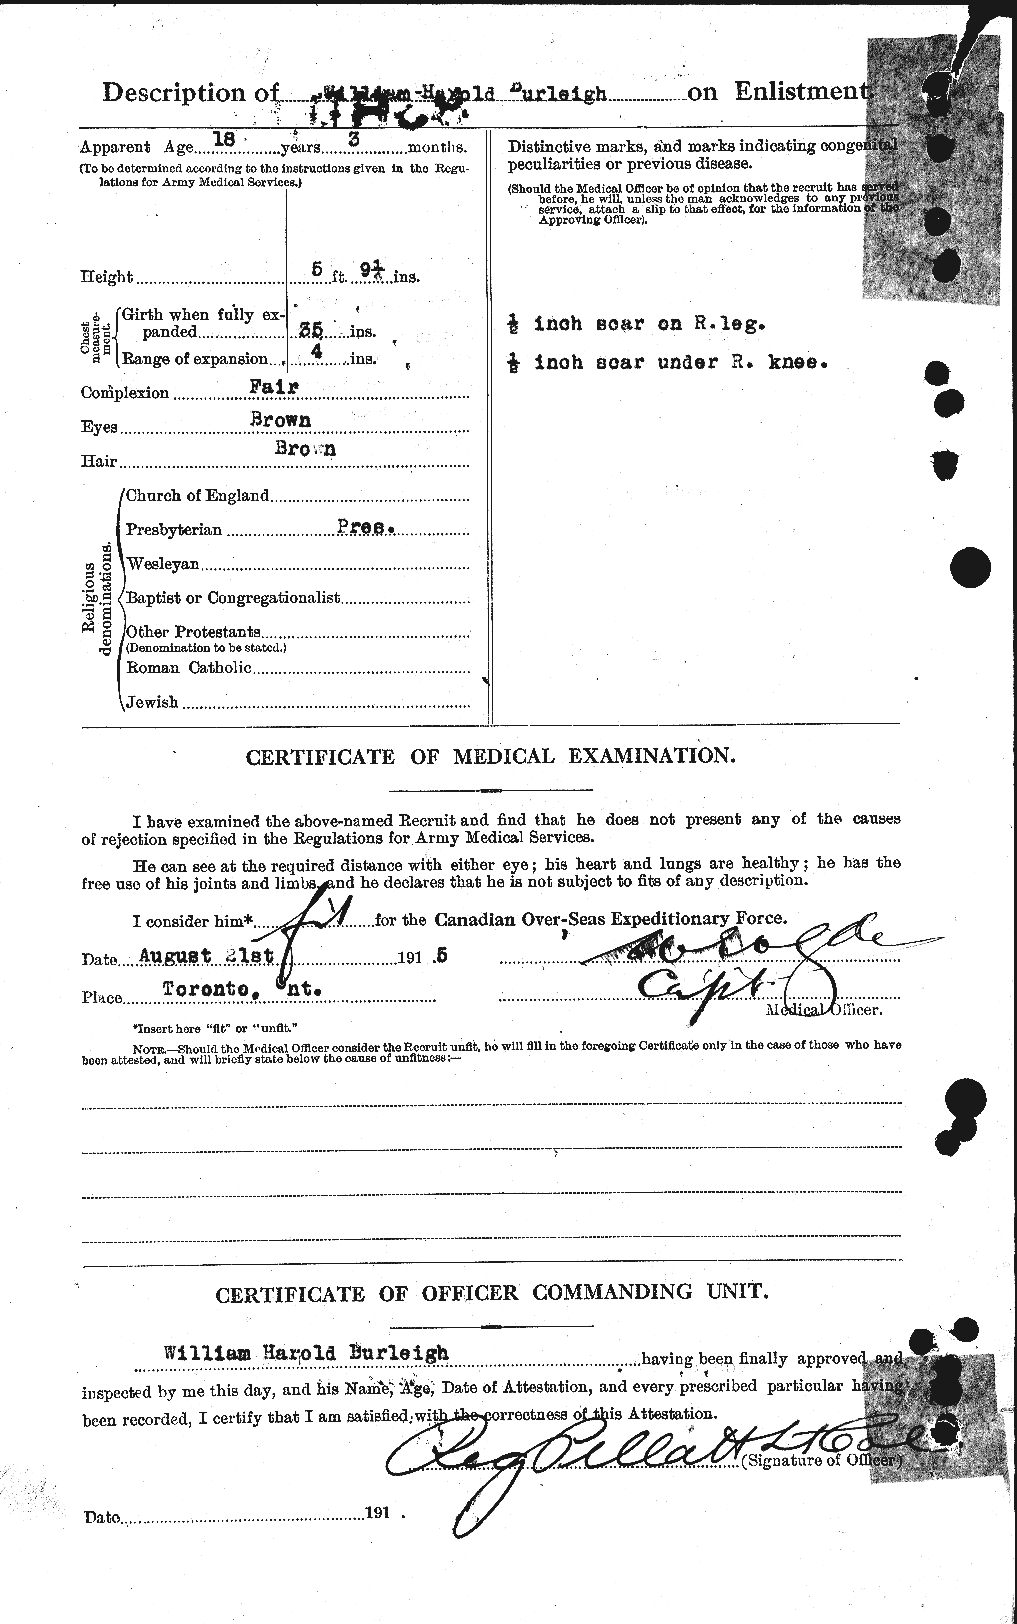 Personnel Records of the First World War - CEF 278656b